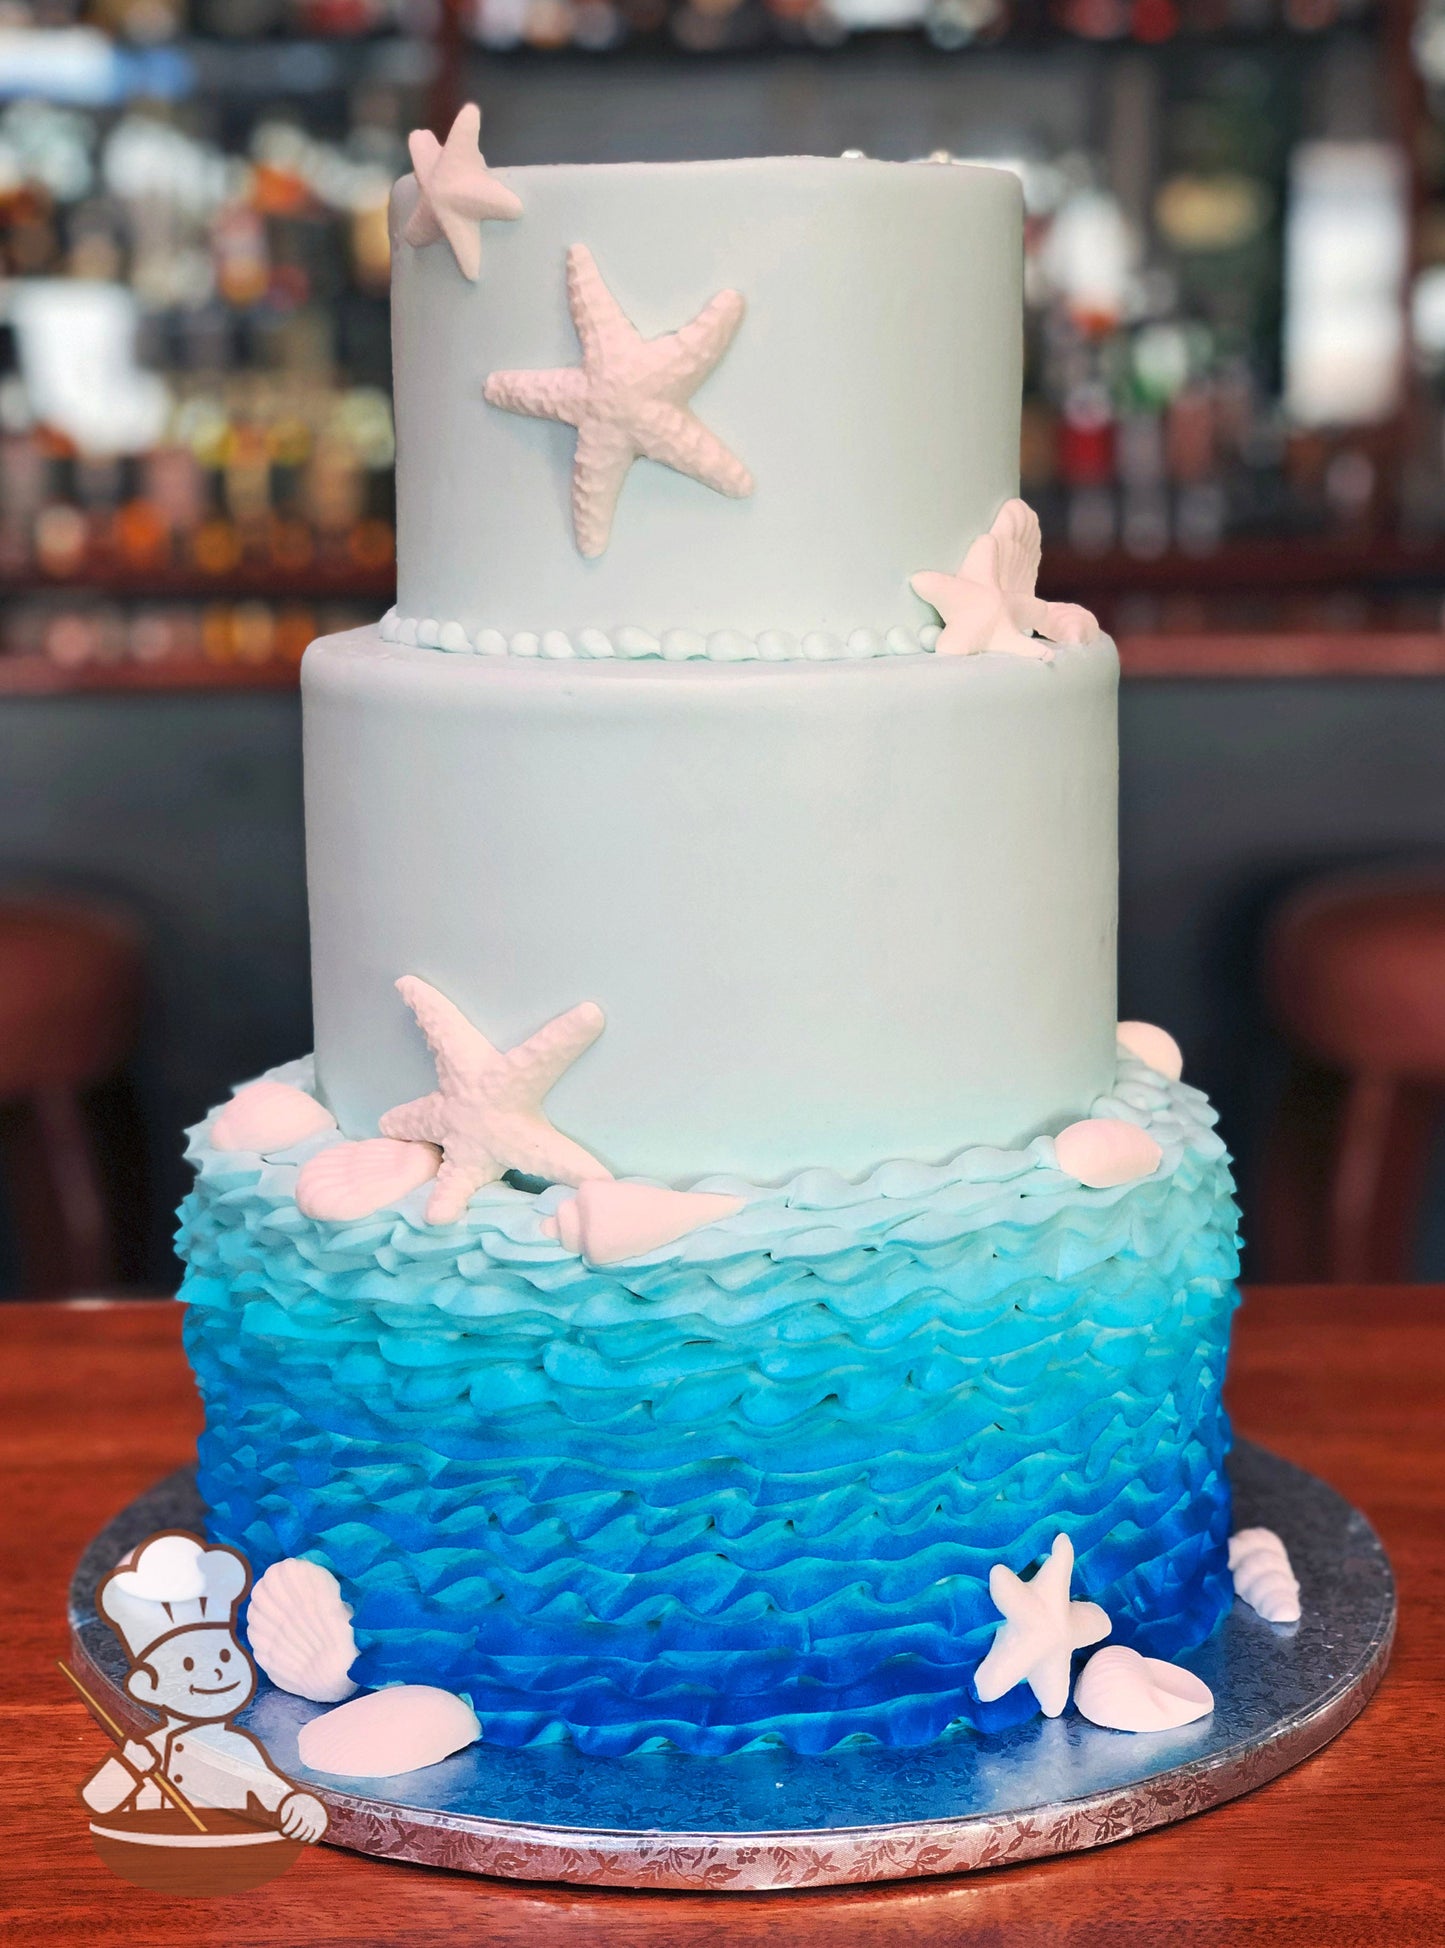 Cake decorated with wavy buttercream piping on the bottom tier, smooth light-blue icing on the middle and top tier and white fondant shells.